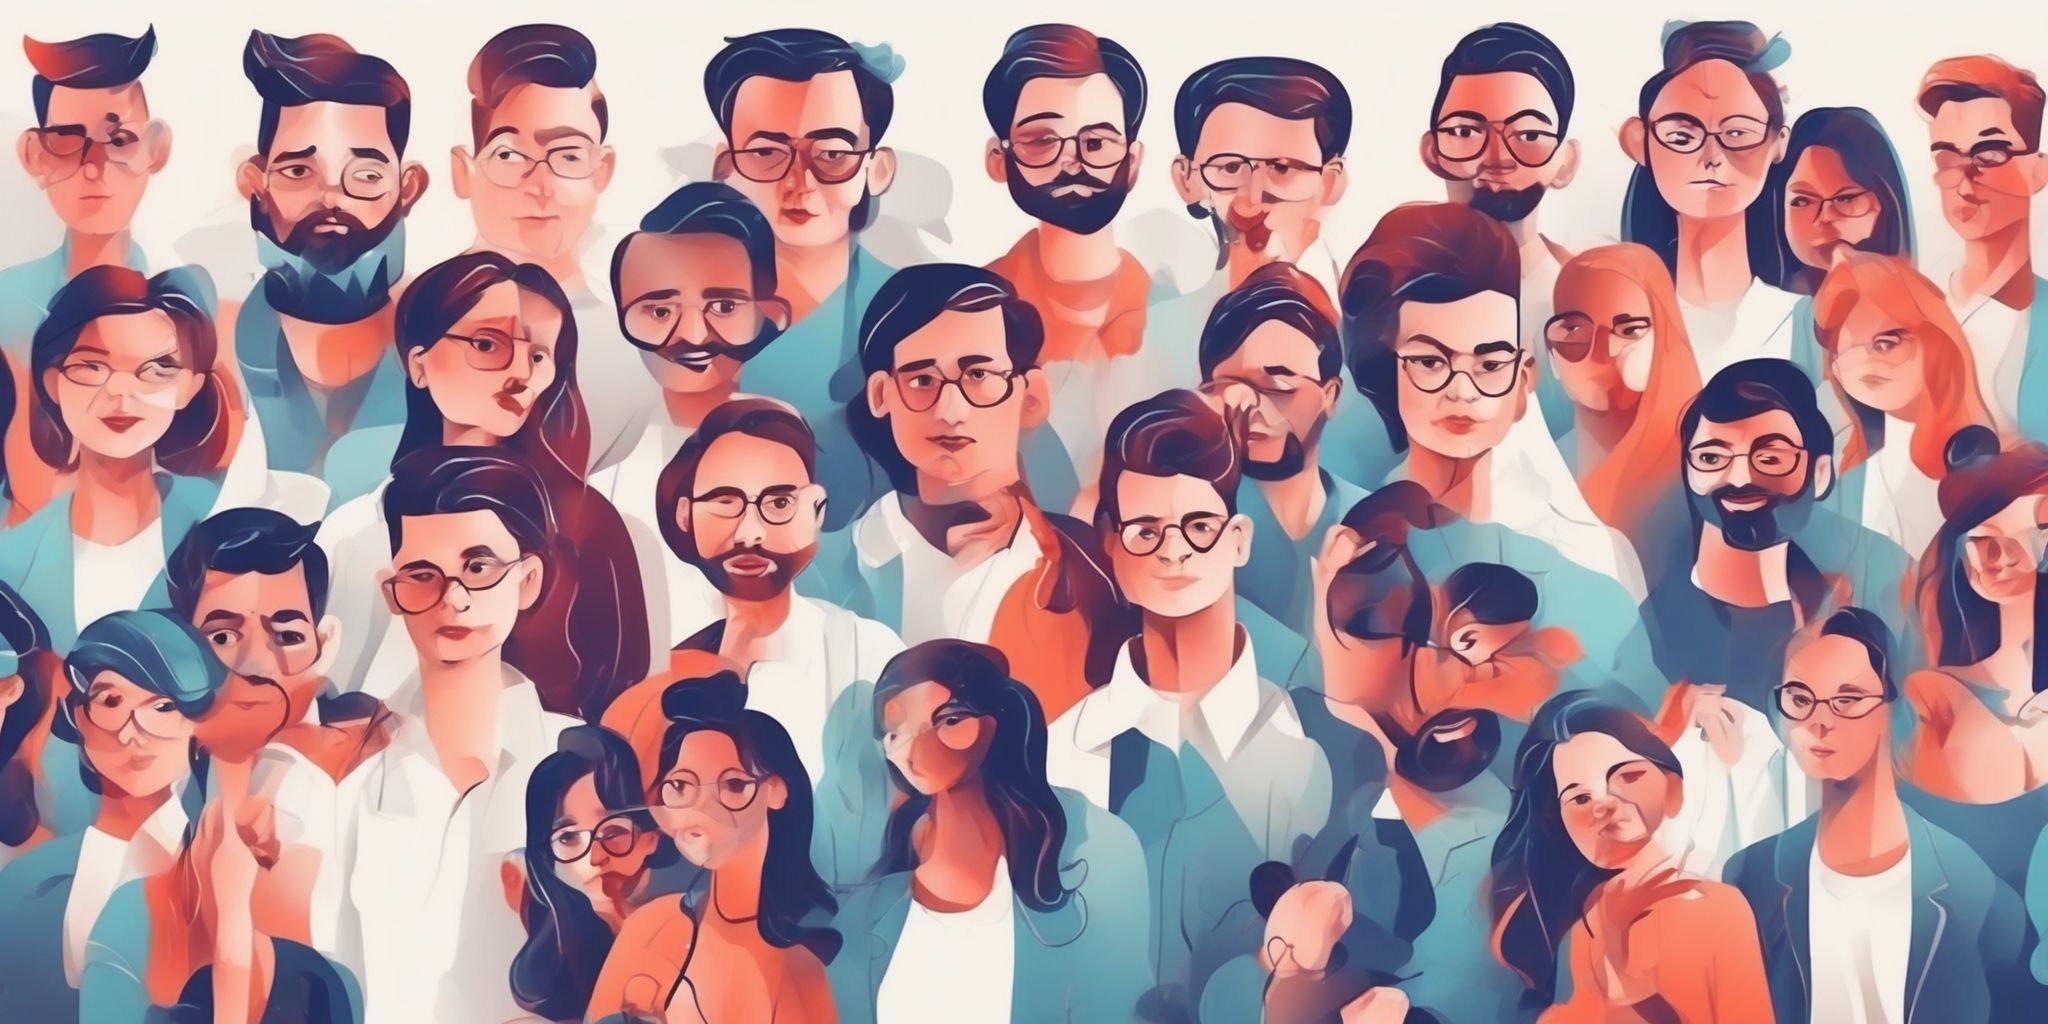 Followers in illustration style with gradients and white background